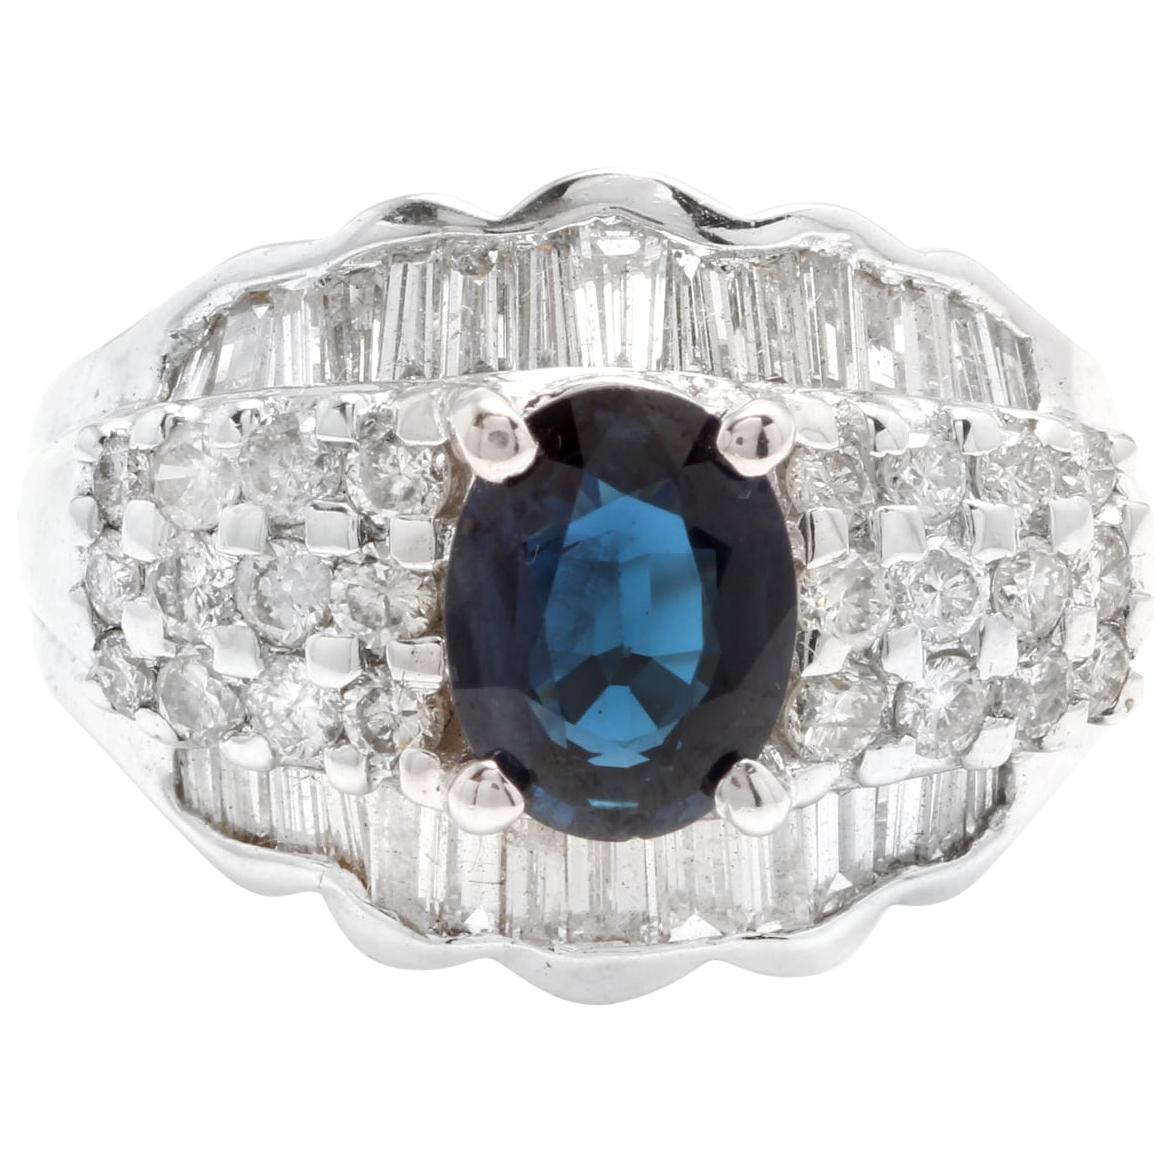 3.46 Carat Exquisite Natural Blue Sapphire and Diamond 18 Karat Solid White Gold